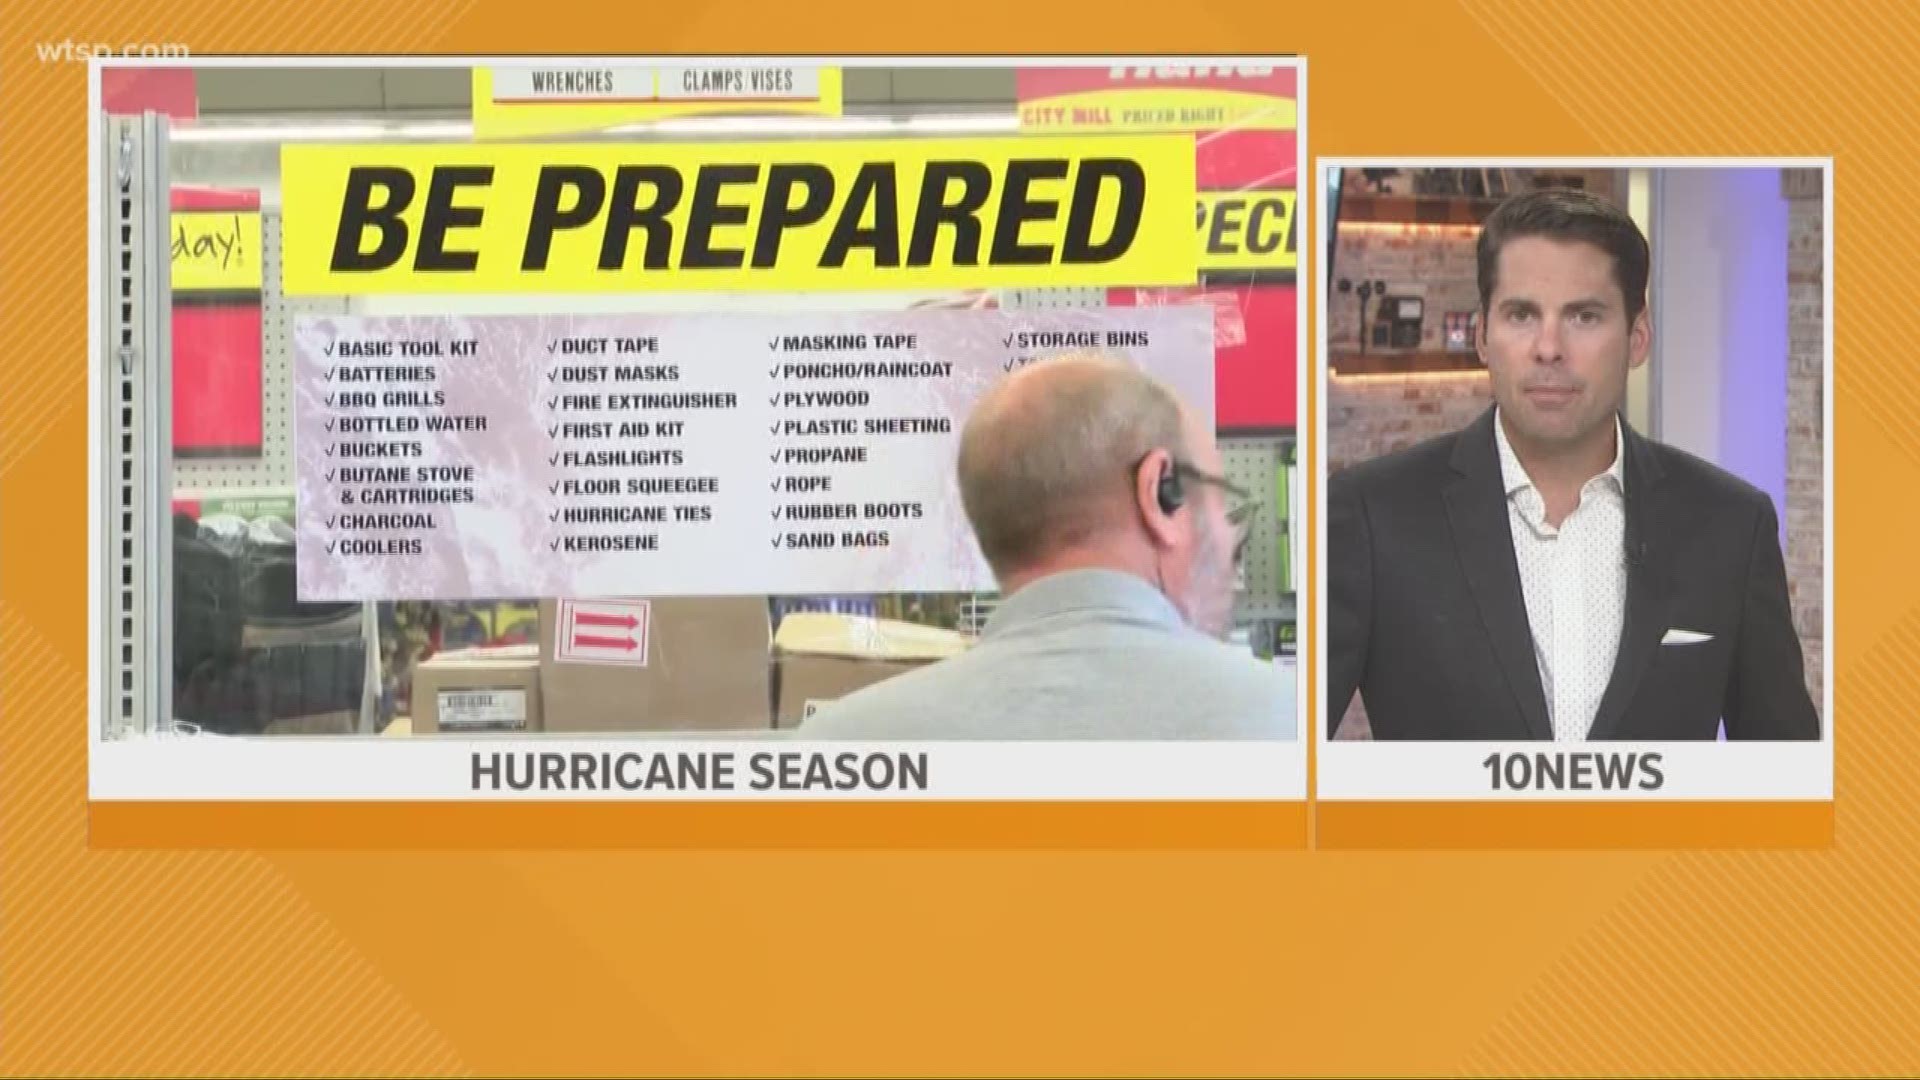 For one more day, several hurricane preparedness supplies won't be subject to sales tax in Florida. https://on.wtsp.com/2ETO3Ho